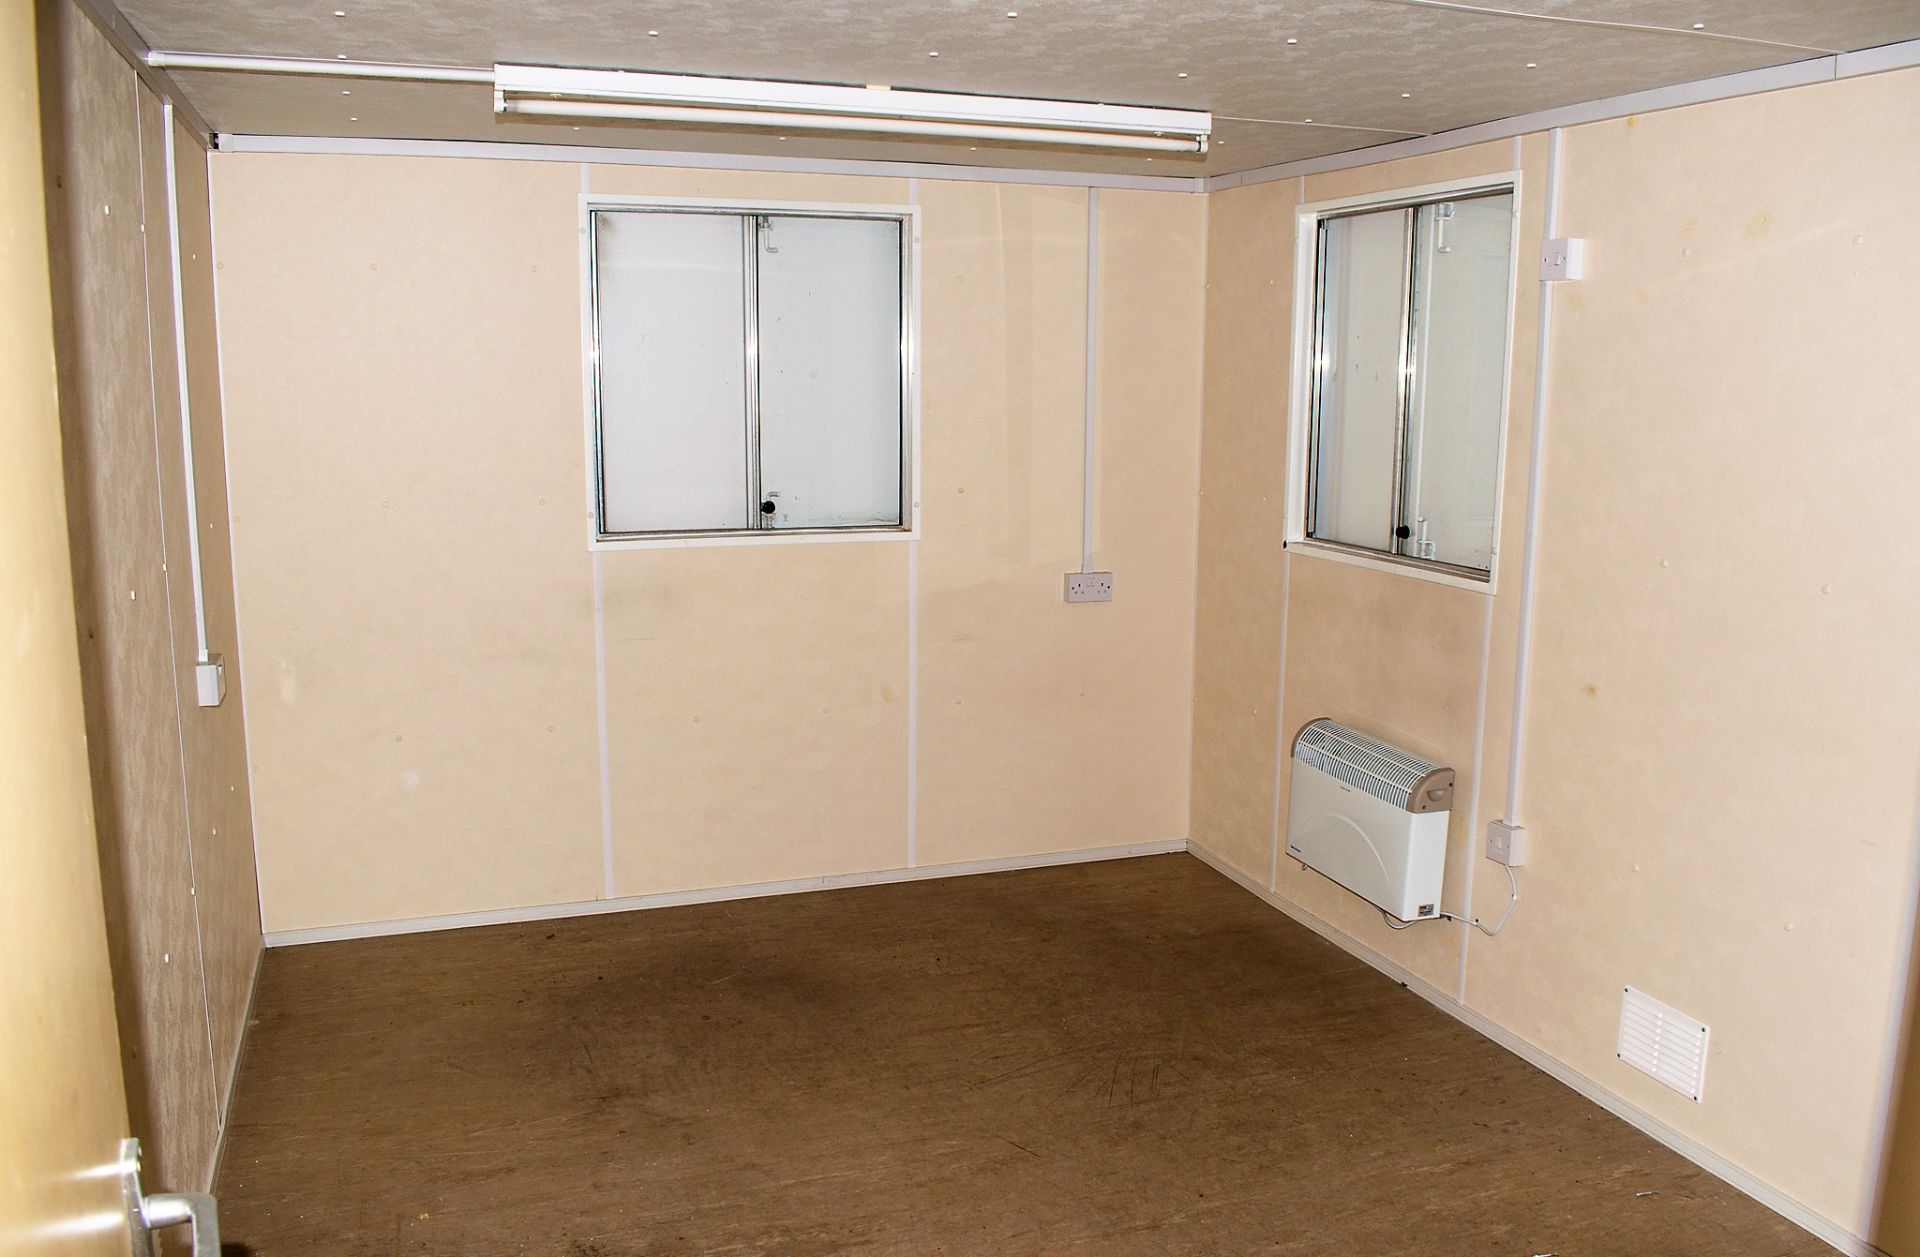 32 ft x 10 ft steel anti vandal toilet/canteen site unit Comprising of: Toilet, shower, lobby & - Image 10 of 11